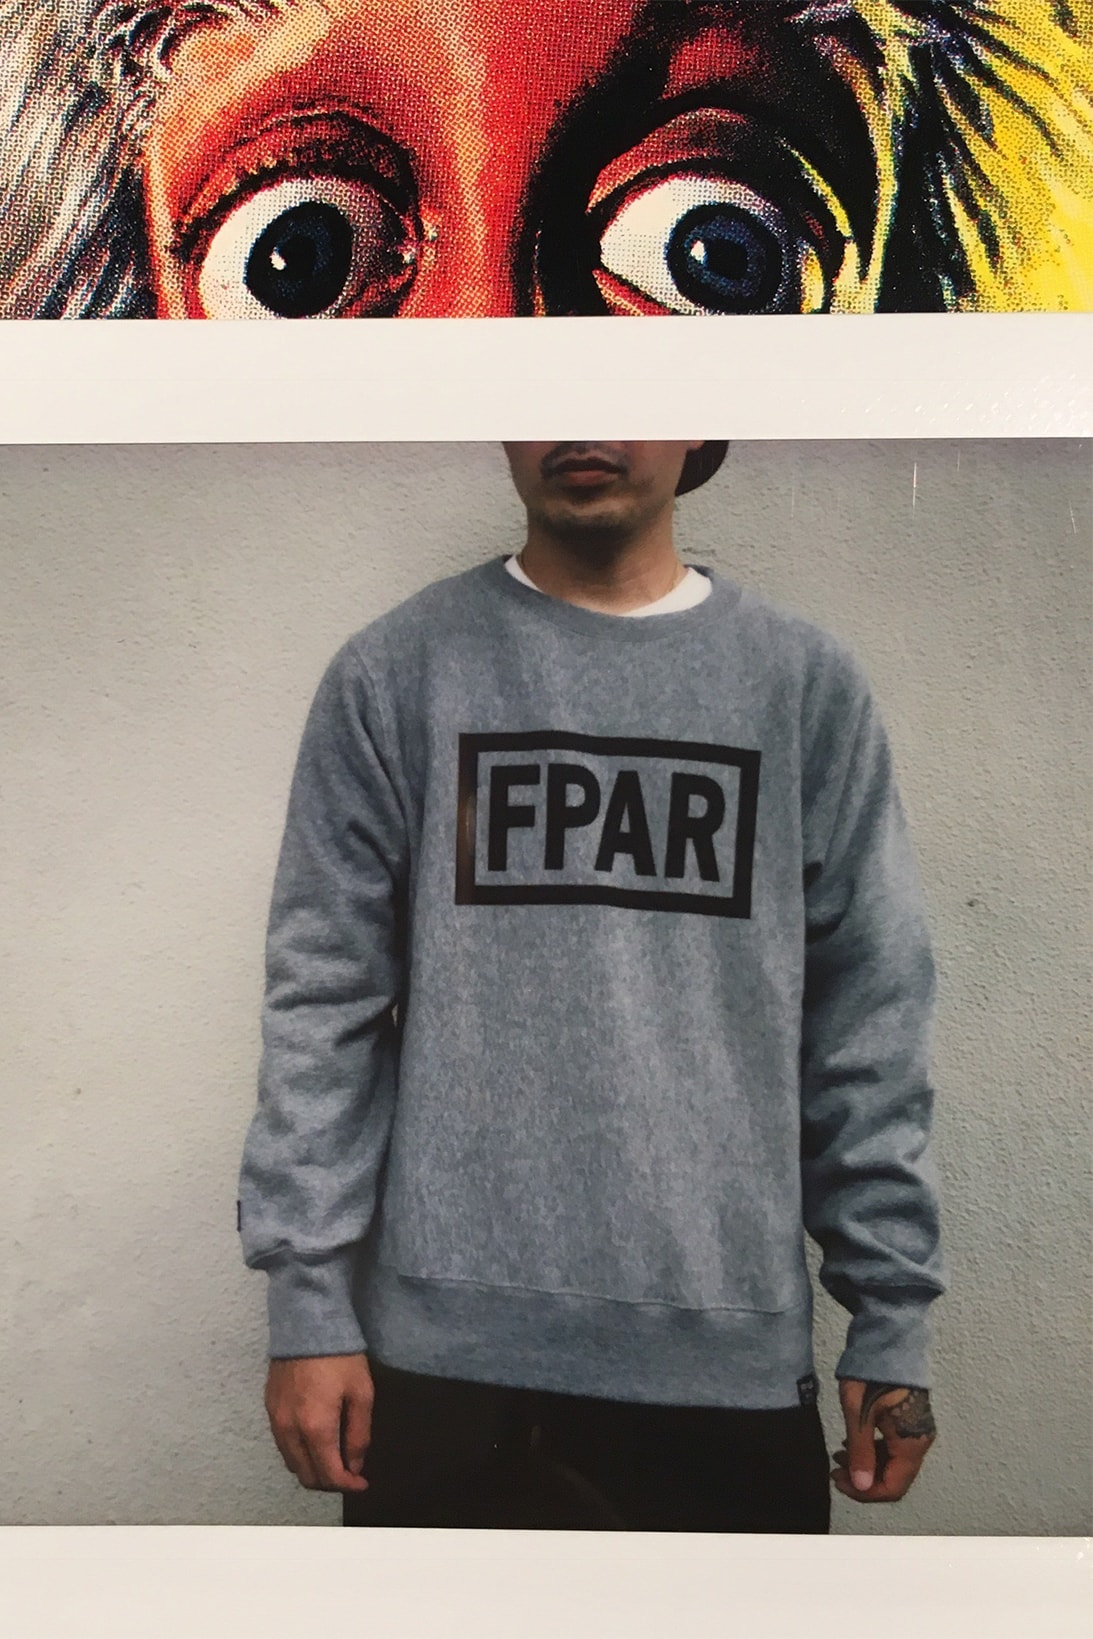 FORTY PERCENTS AGAINST RIGHTS 2017 Fall Winter Collection Lookbook FPAR